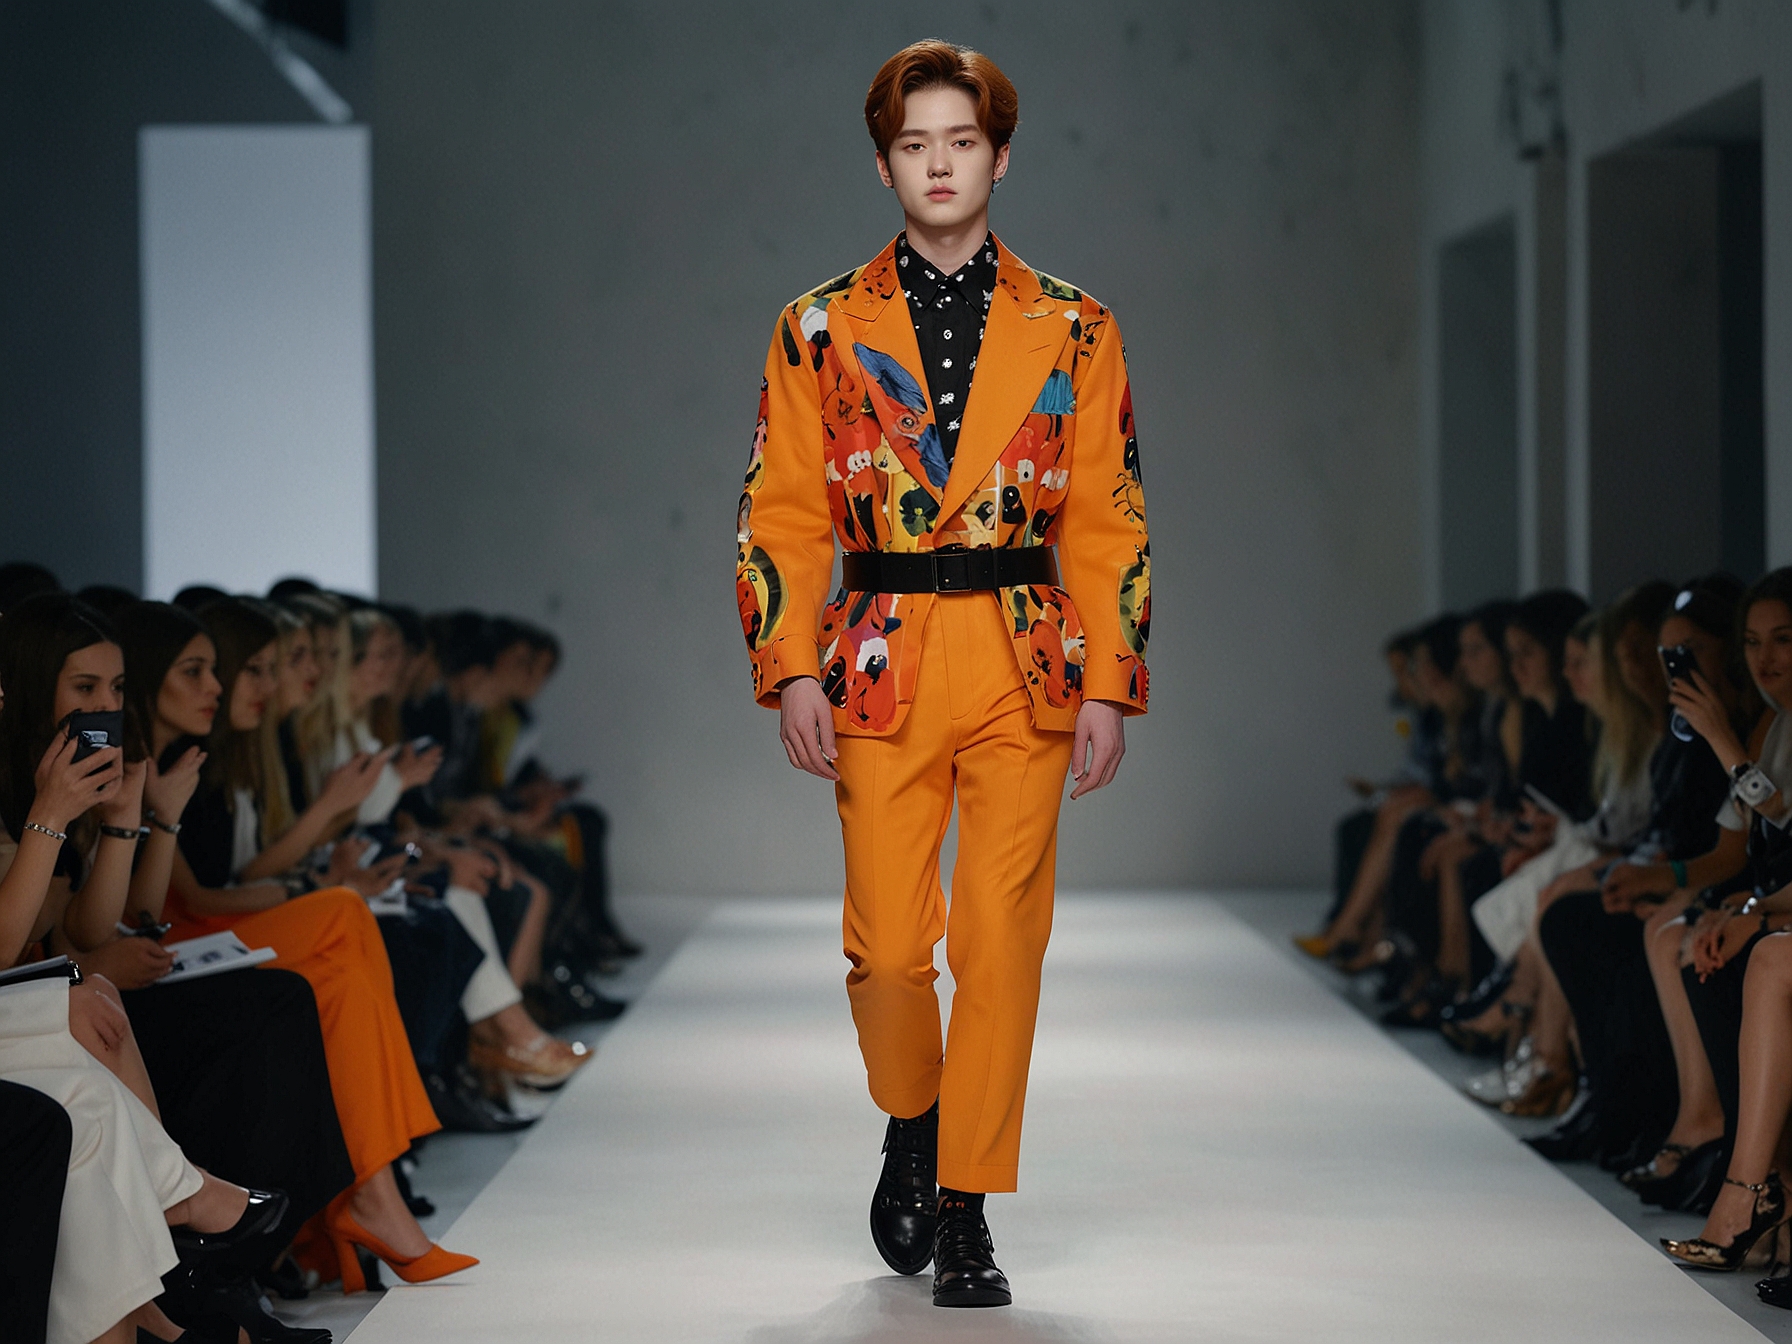 Jaehyun of NCT's Dojaejung walking the Milan Fashion Week runway in a bold outfit with daring patterns and vibrant colors, showcasing his confident strides and comfort in the limelight.